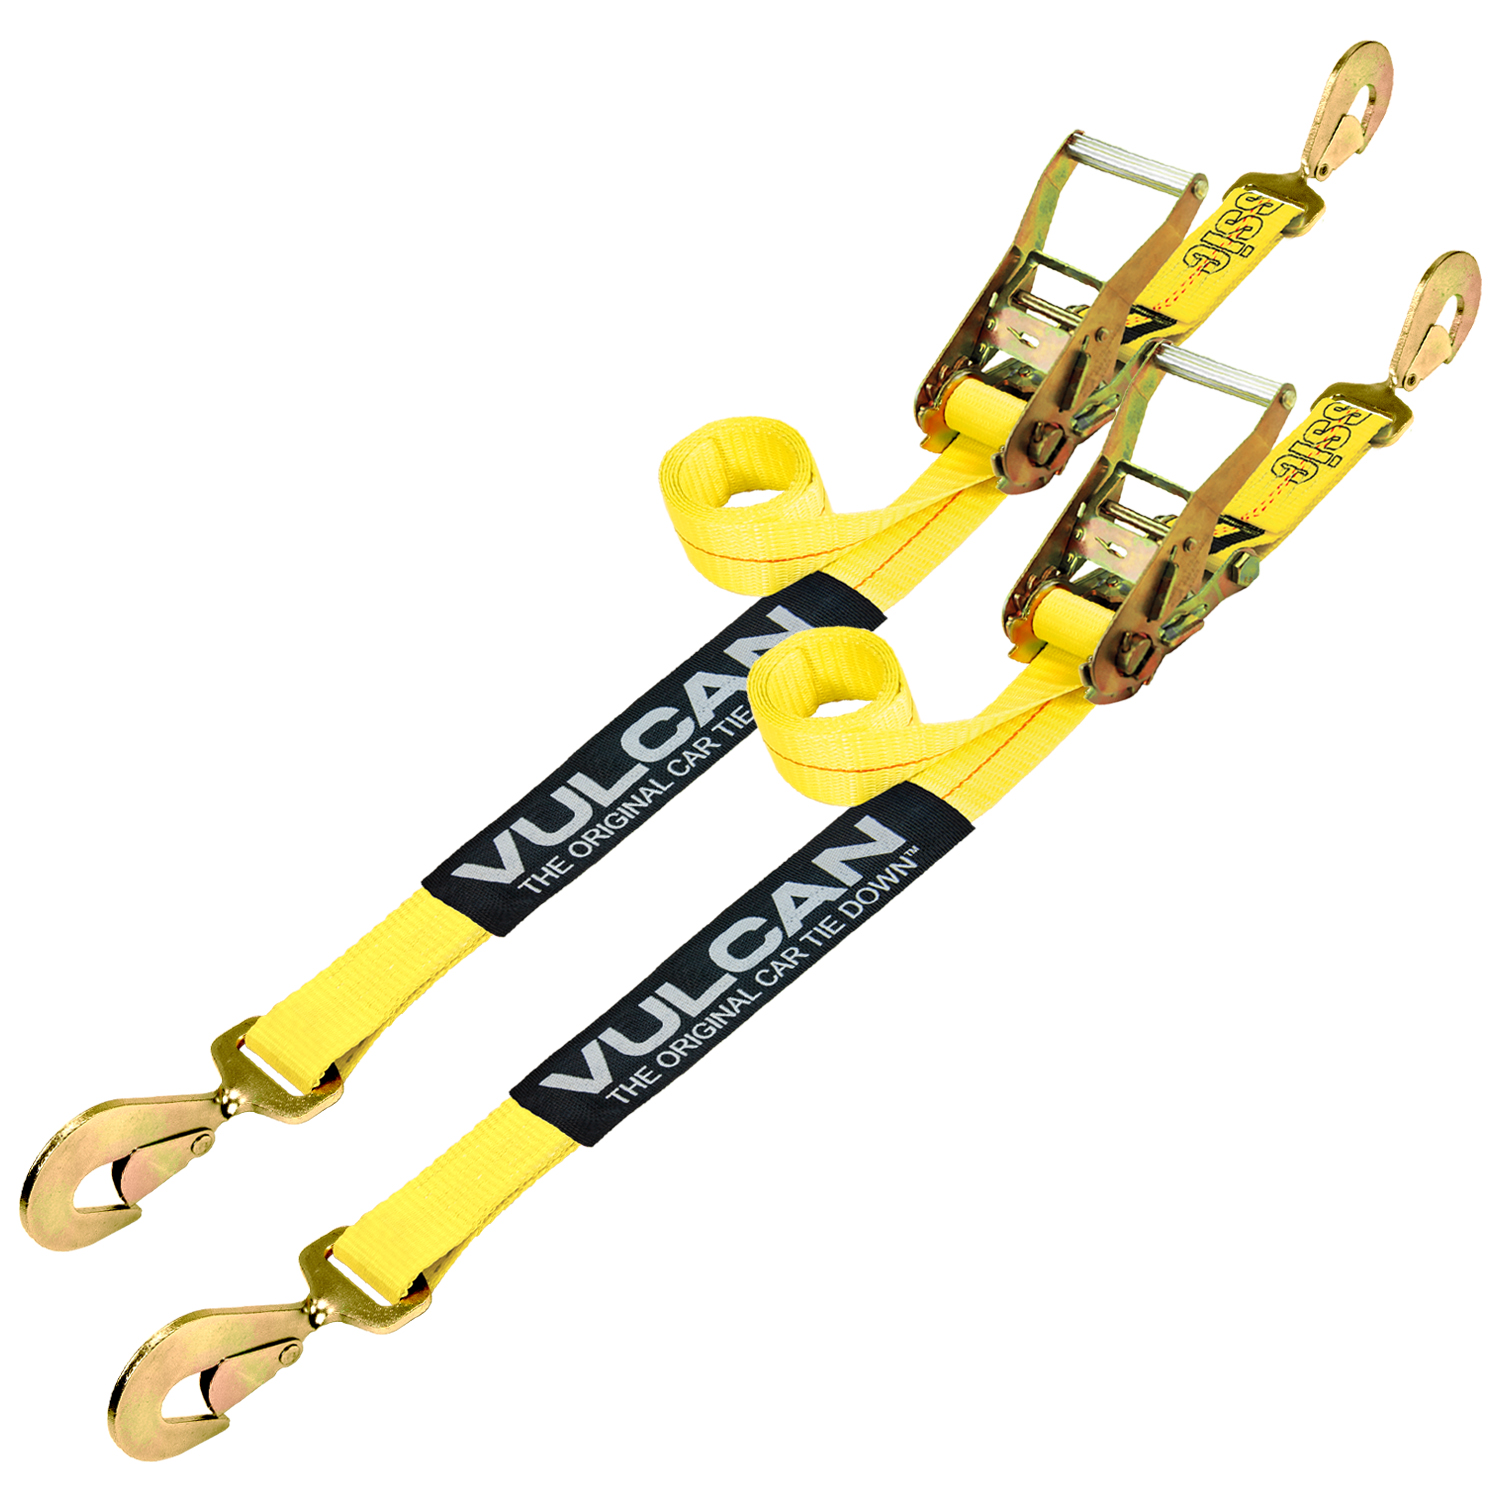 VULCAN Ratchet Strap with Wire Hooks 2 Inch x 30 Foot - 2 Pack - High Viz -  3,300 Pound Safe Working Load